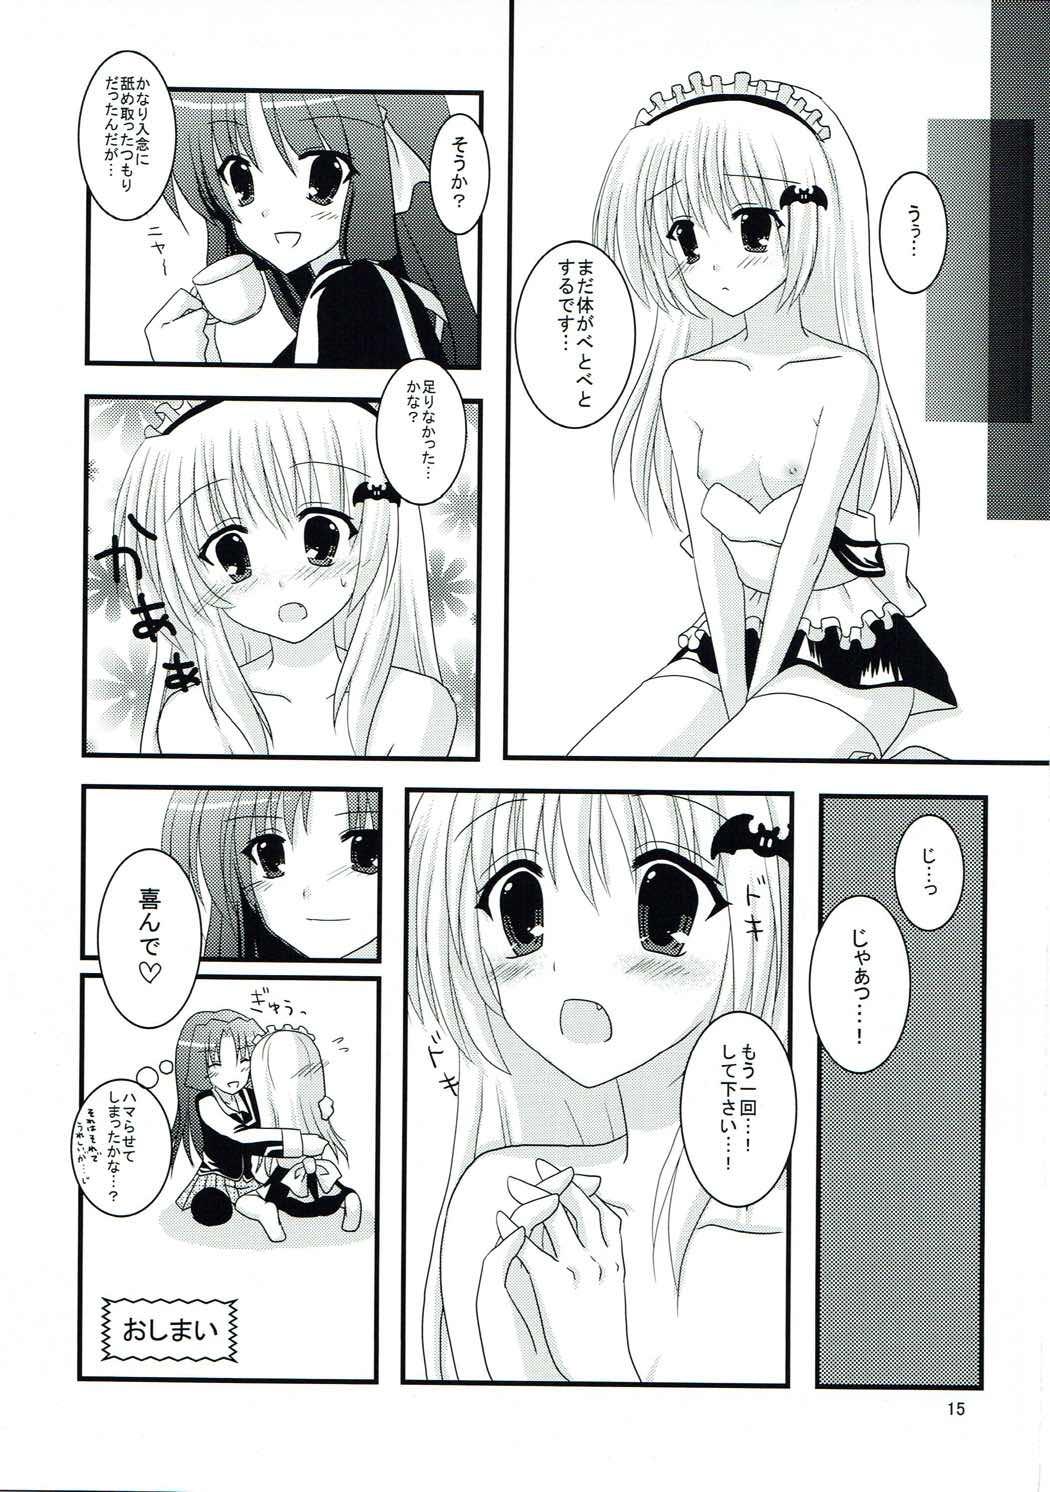 Bunduda Maple Syrup - Little busters Nut - Page 14